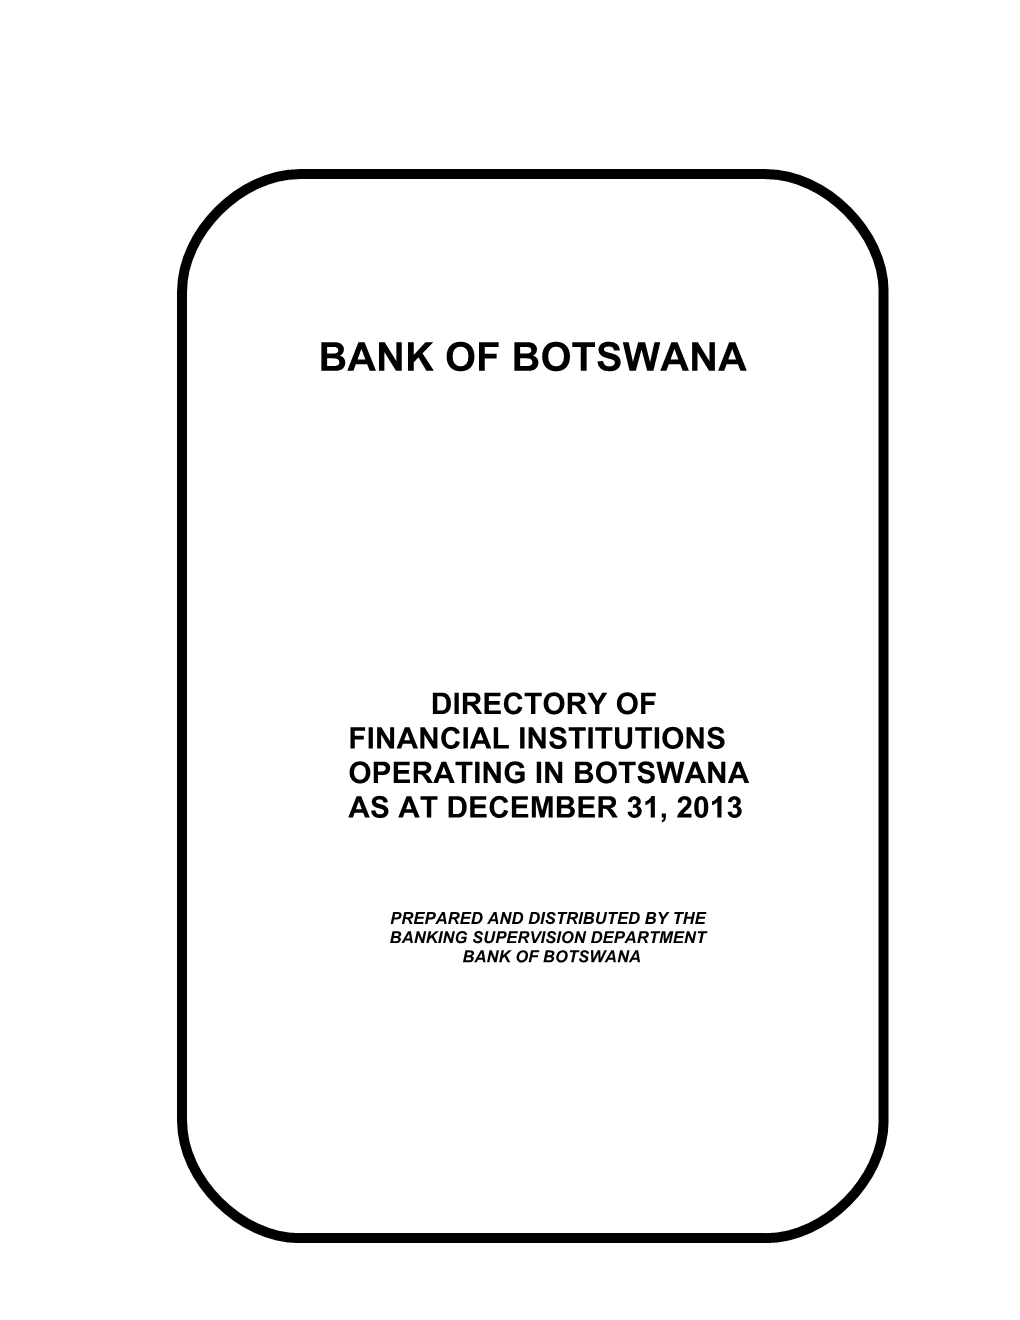 This Directory Is Compiled and Distributed by the Banking Supervision Department of The